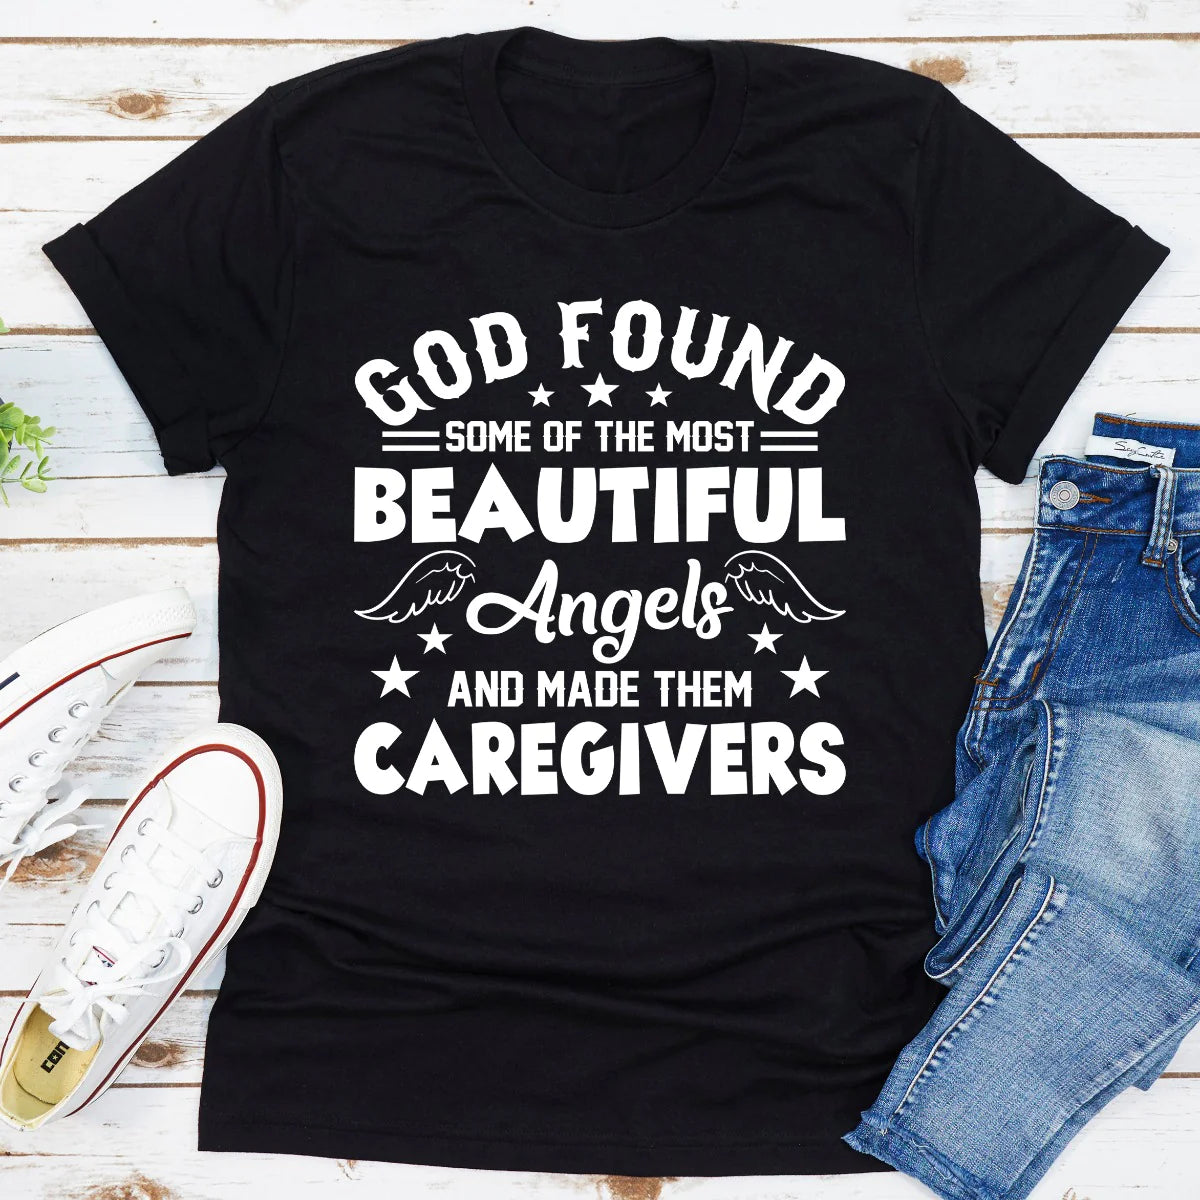 God Found Some of the Most Beautiful Angels and Made Them Caregivers T-Shirt